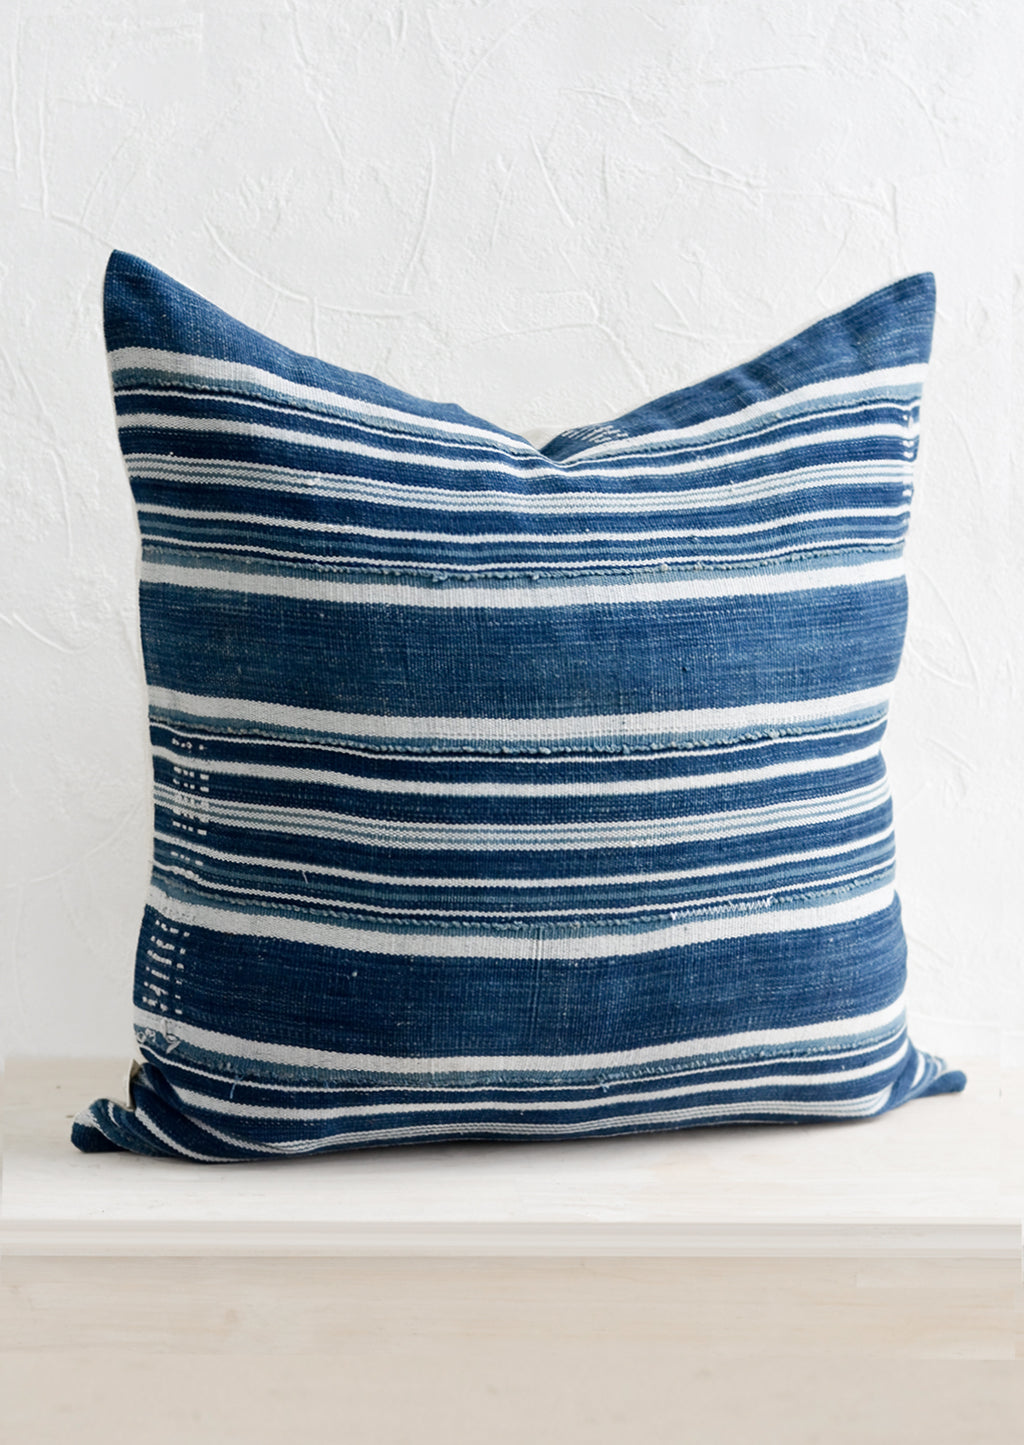 2: A throw pillow made from dark indigo fabric with white stripes and embroidery detailing, on a bench.